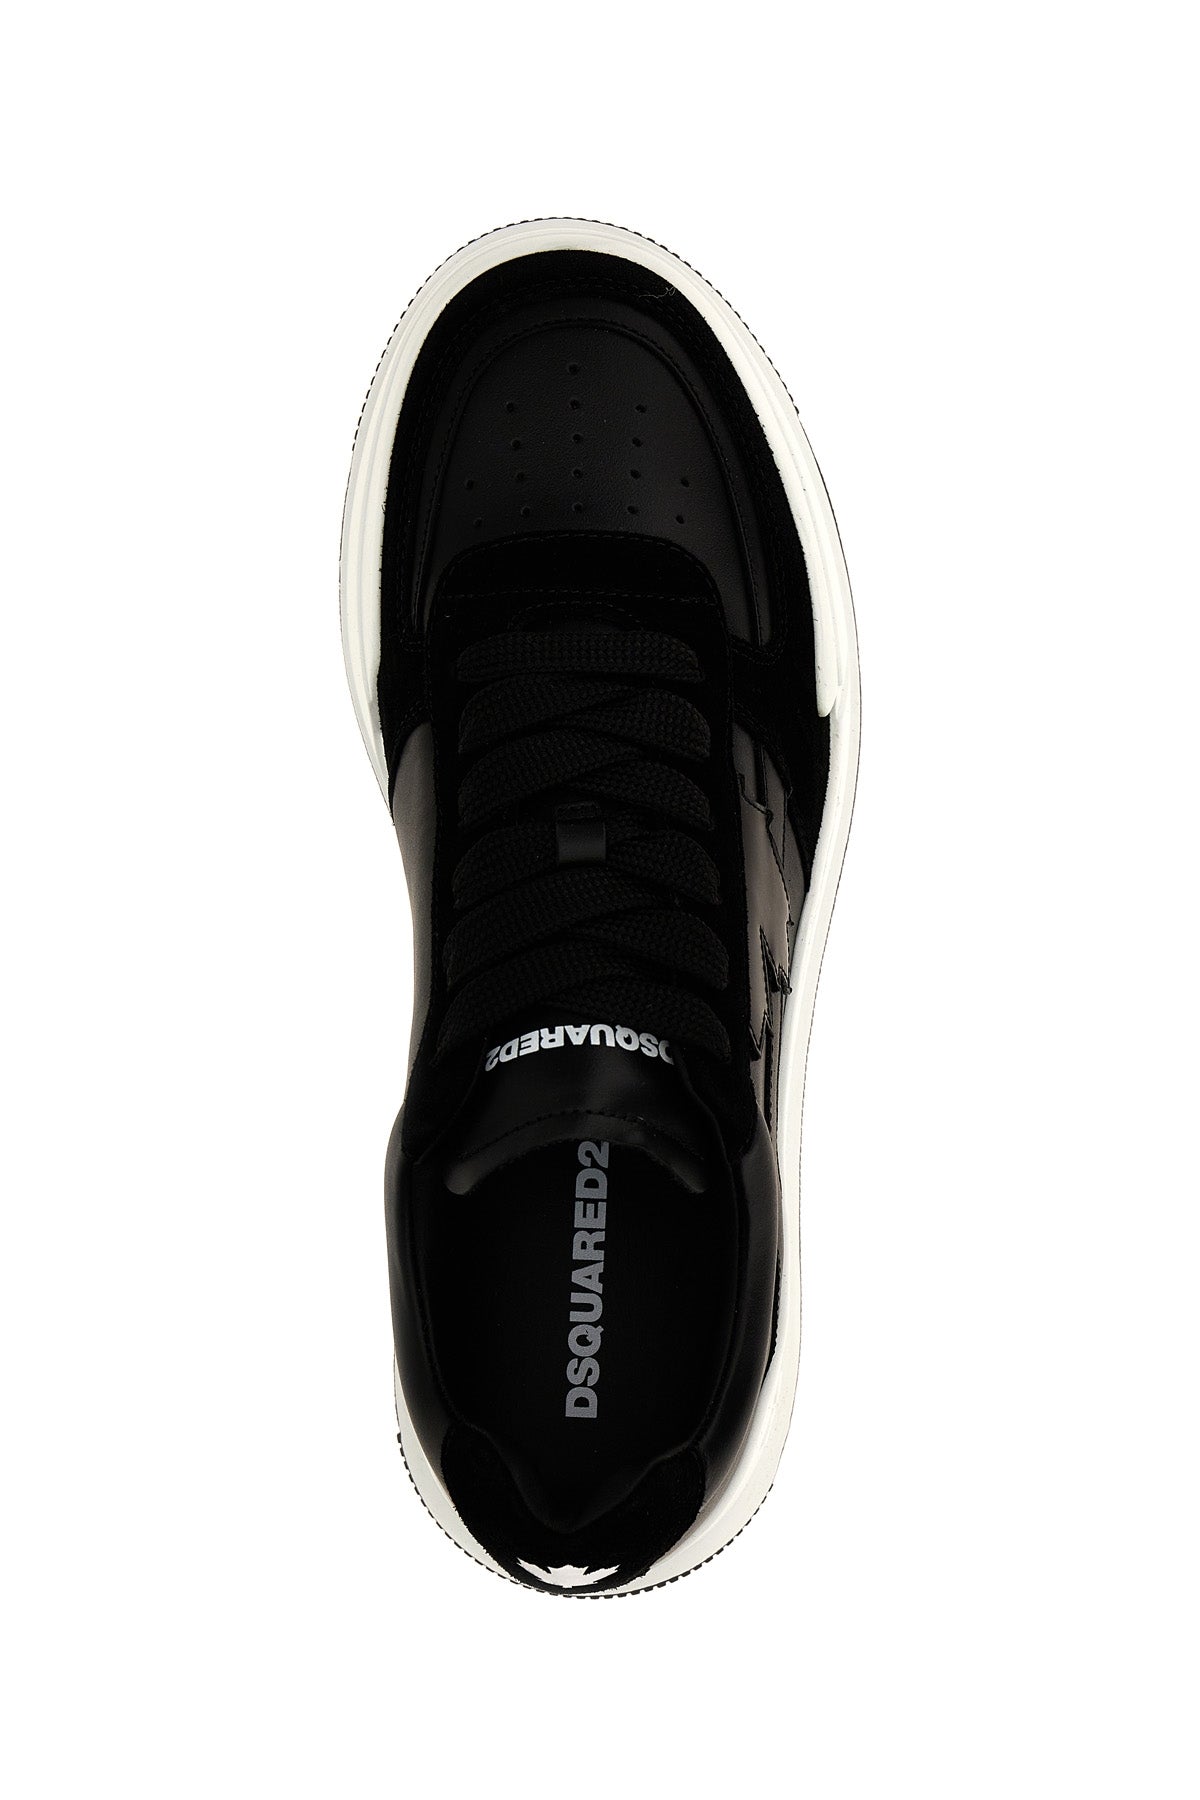 Dsquared2 'CANADIAN' SNEAKERS SNM024801506722M063